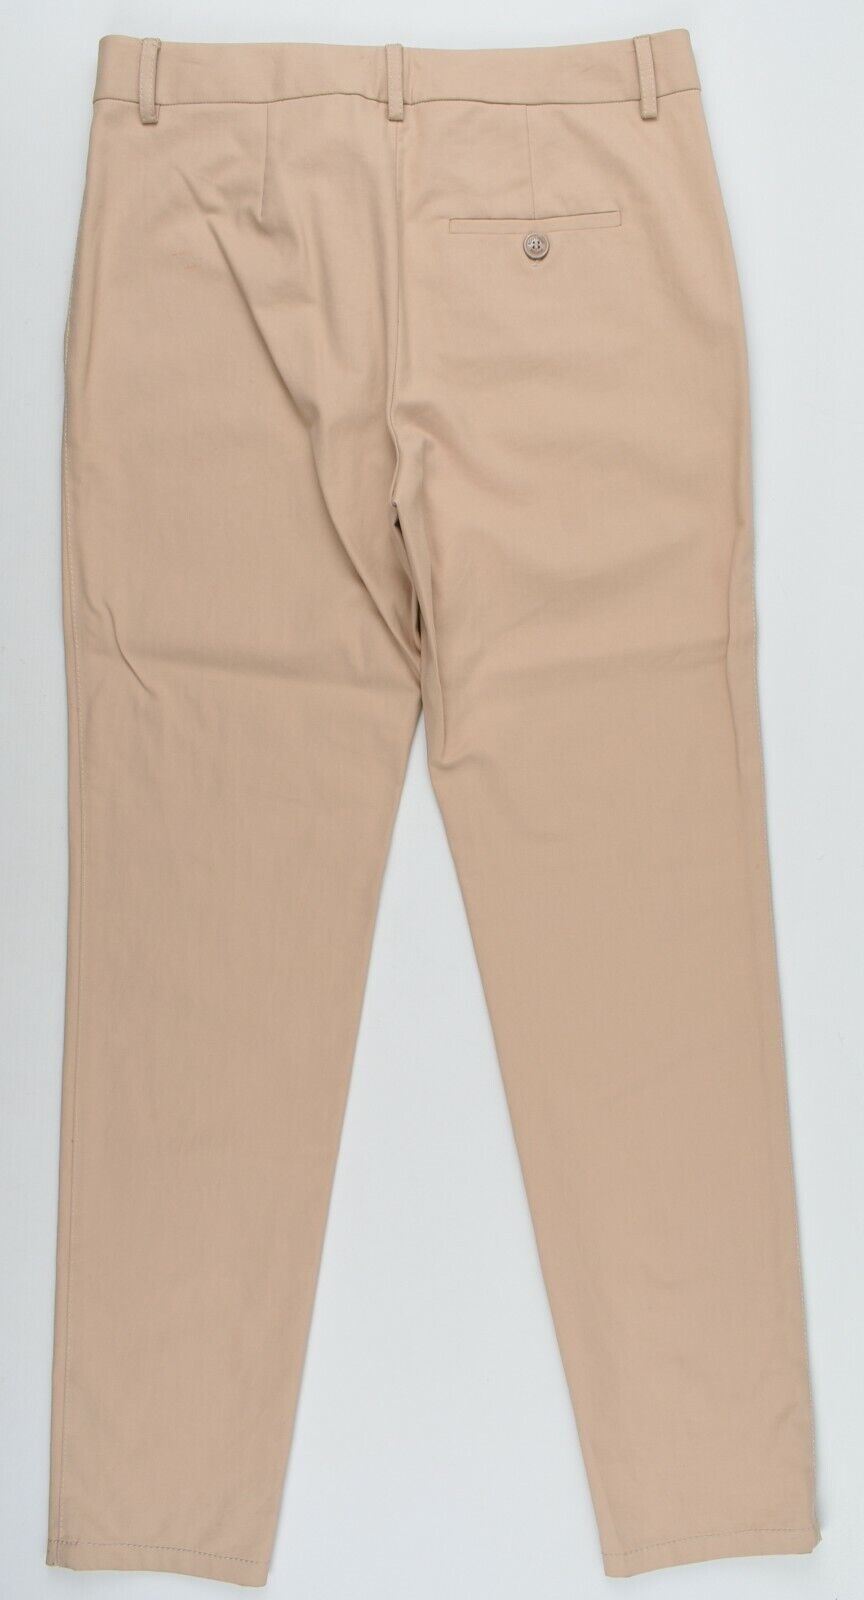 BOUTIQUE MOSCHINO Women's Beige Trousers Pants, size UK 8